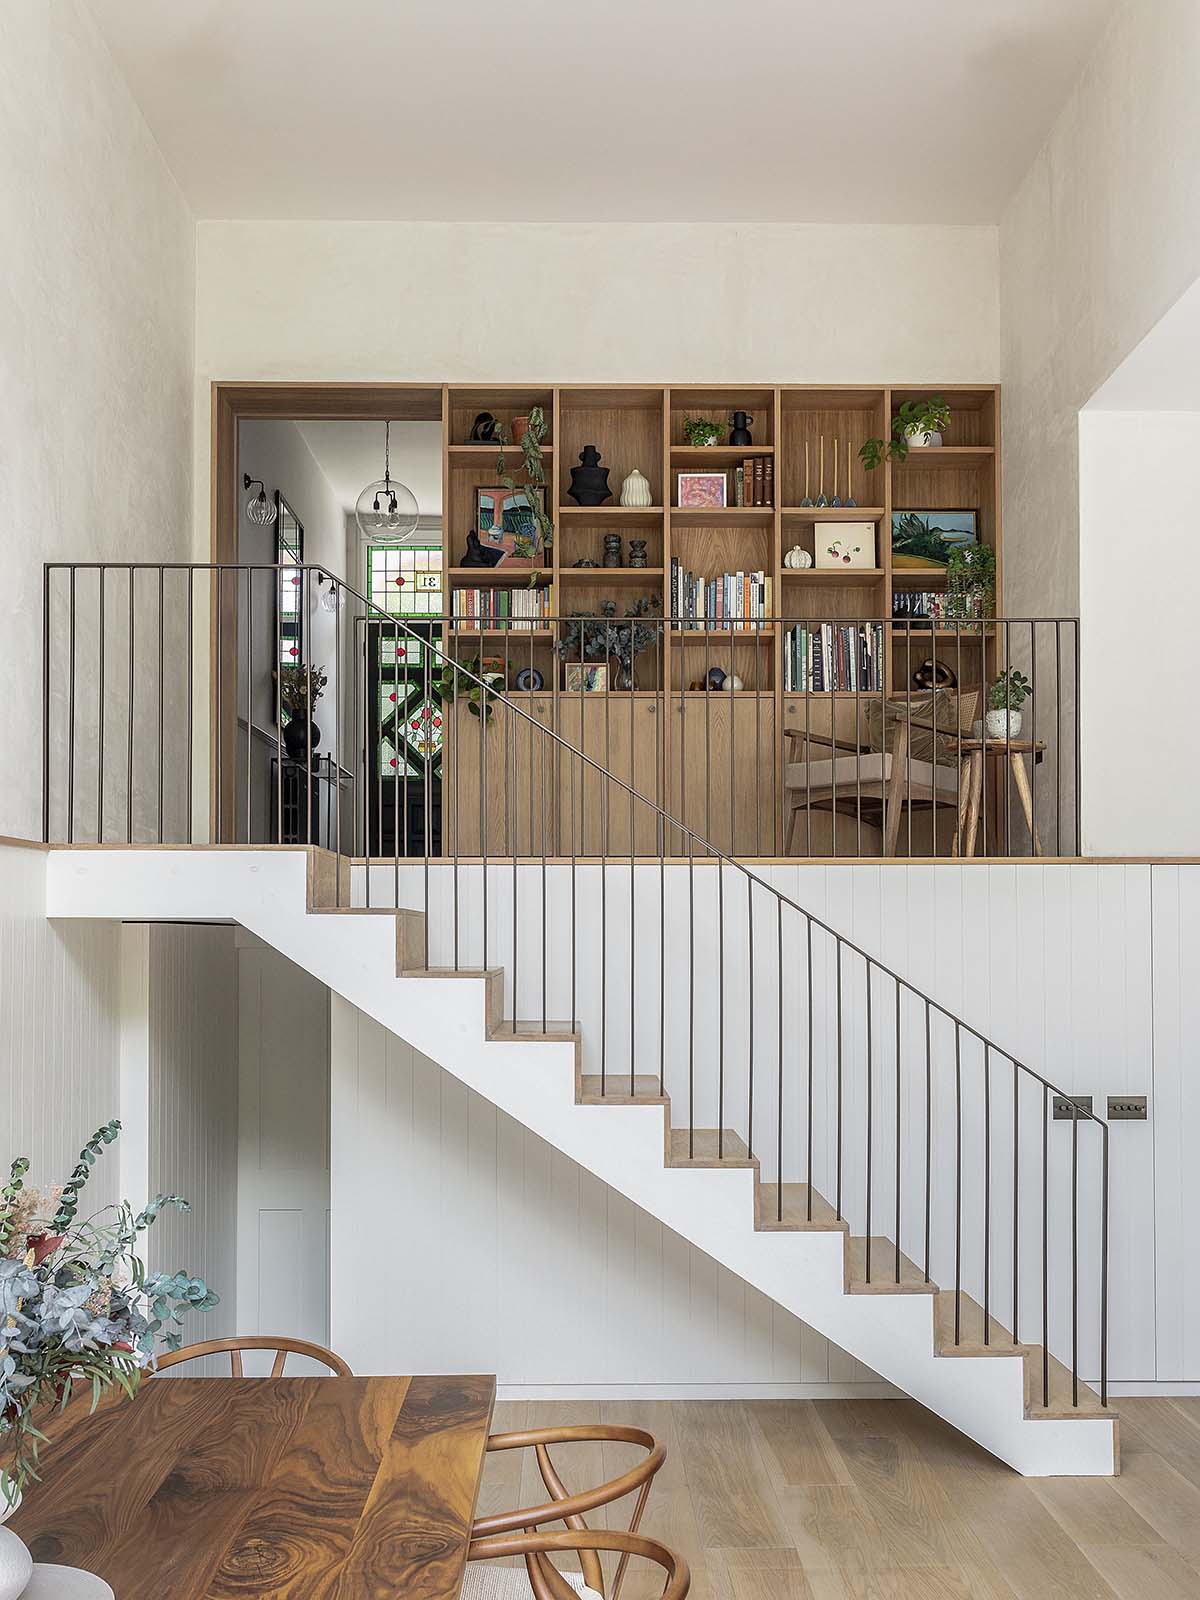 Emil Eve renovation on Talbot Road in London - pictured is the artfully designed stairs